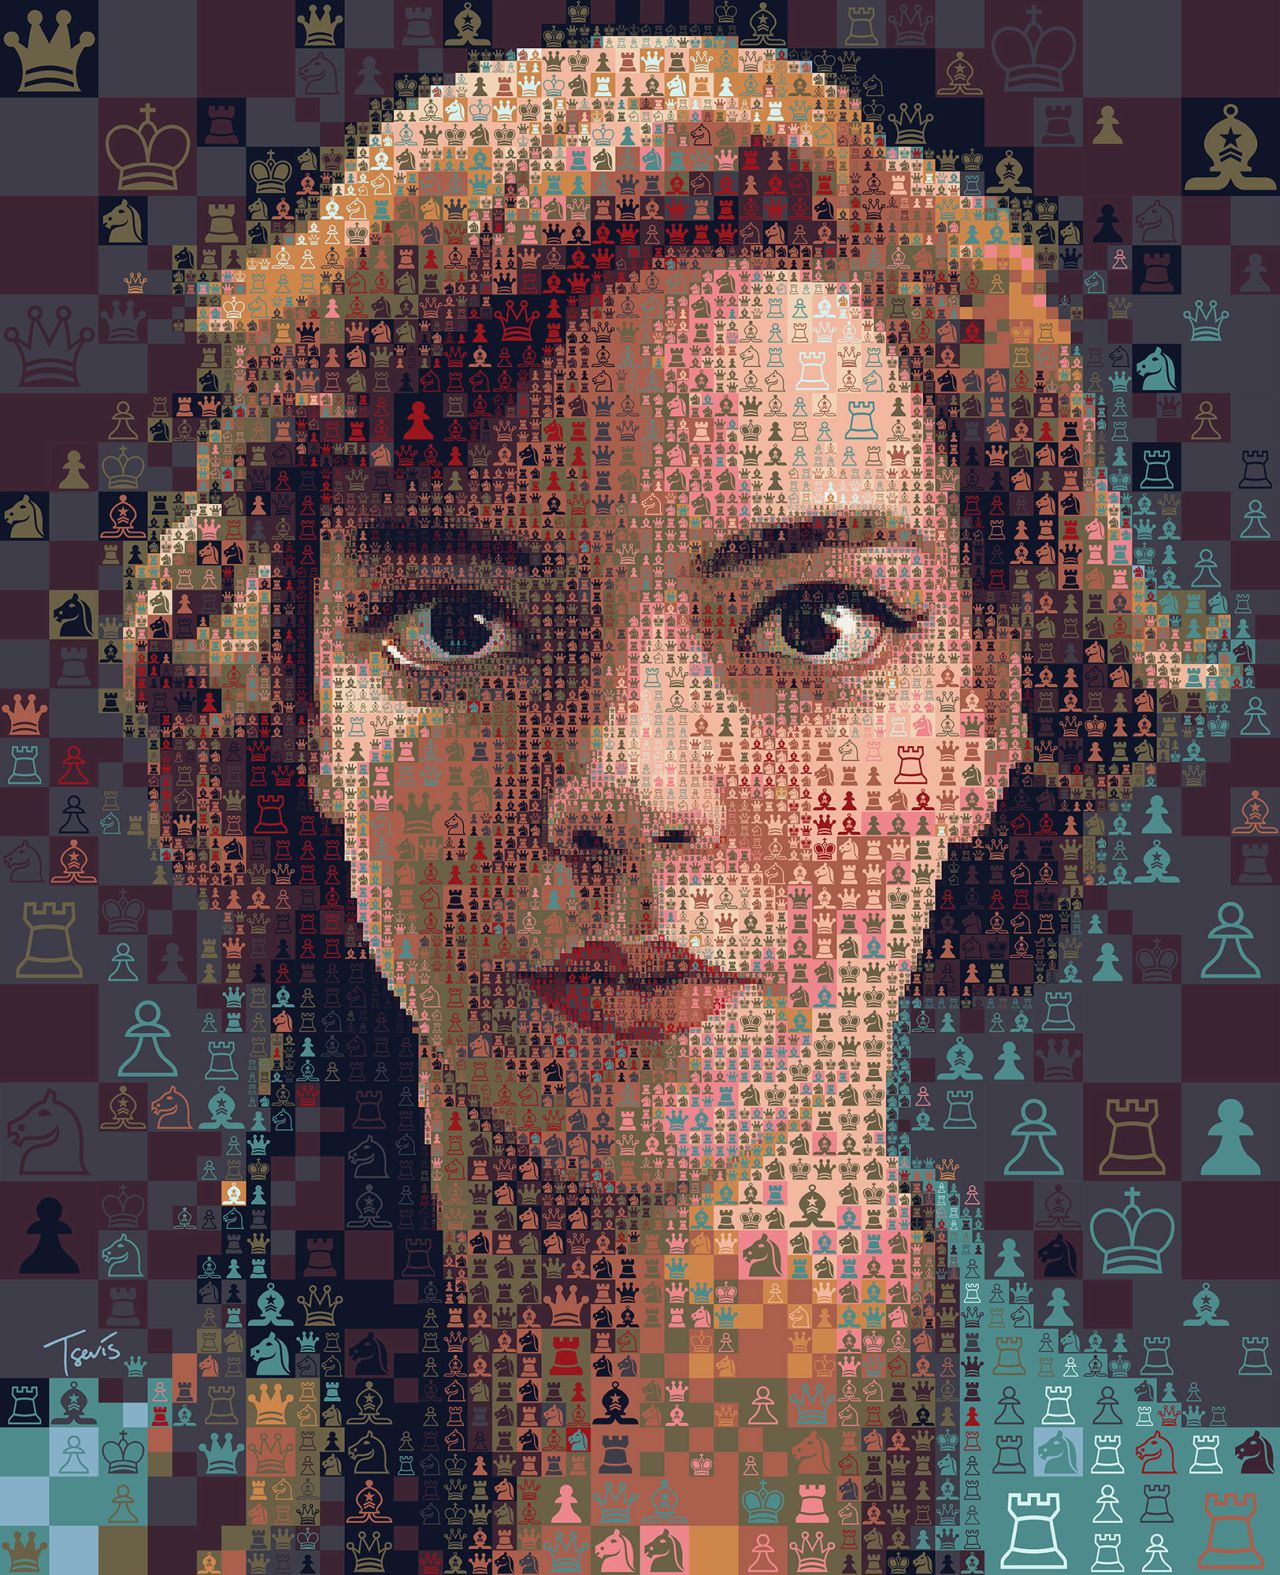 photo mosaic manipulation queen gambit by charis tsevis